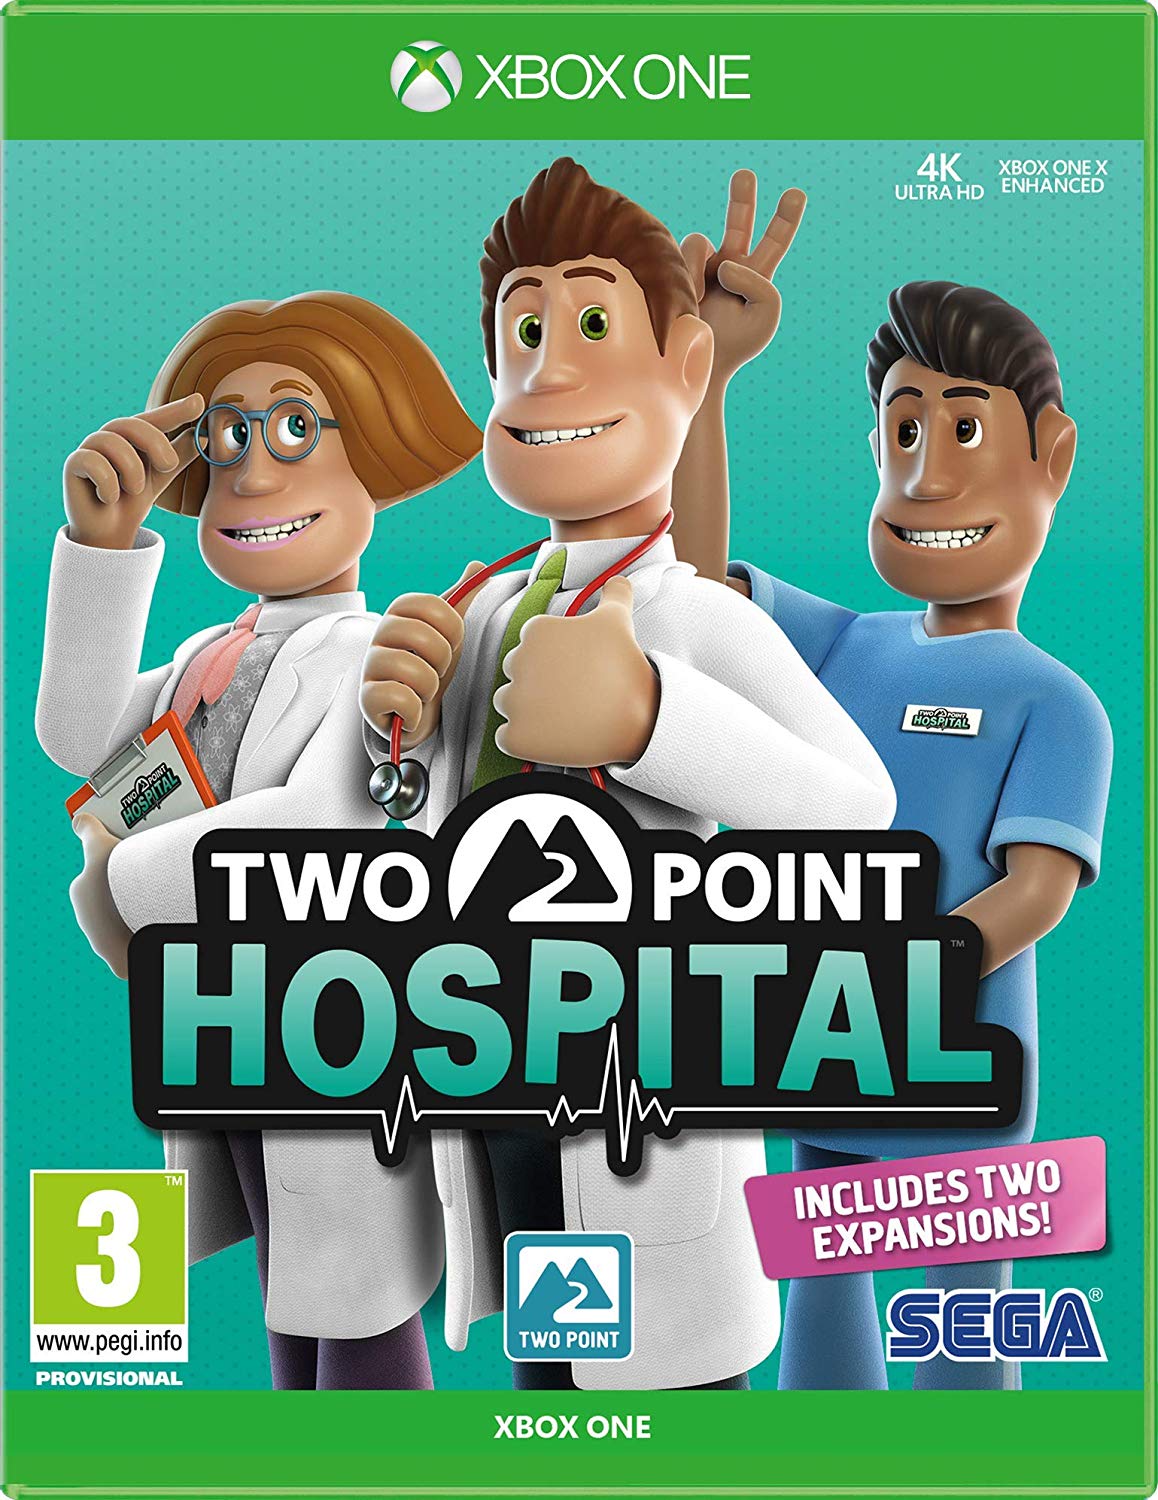 Two Point Hospital Digital Download Key (Xbox One): Europe